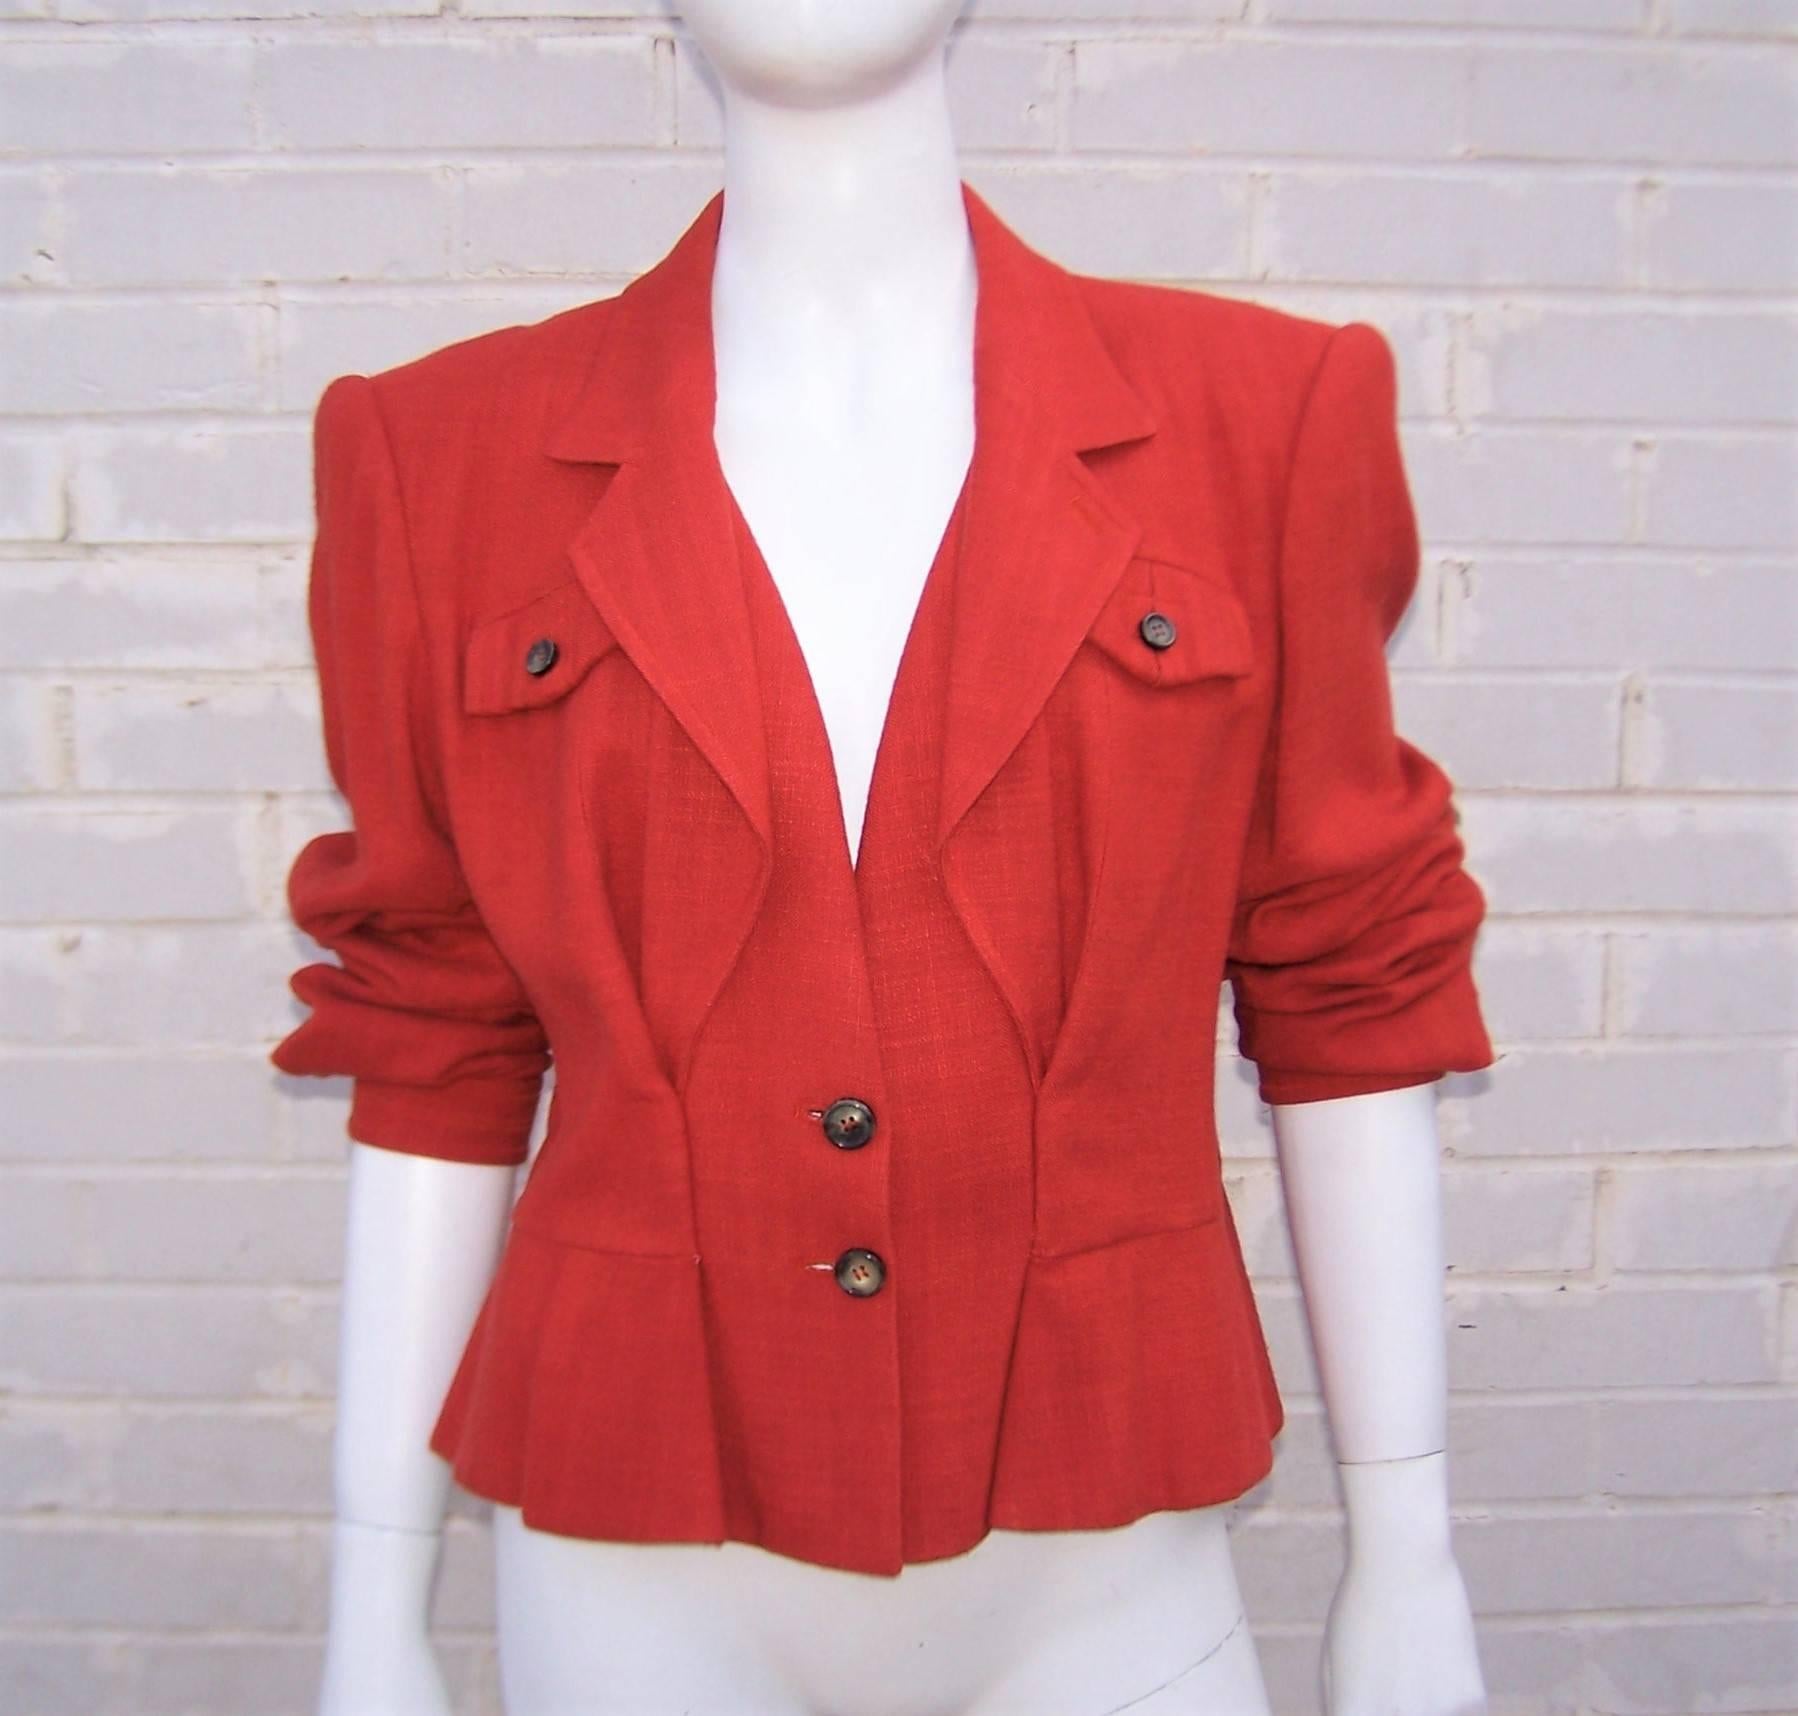 Nips and tucks abound on this stylish 1990's version of a safari jacket from Yves Saint Laurent.  The collared jacket can be worn as a secondary layer or solo with faux horn buttons at the front, breast pockets and cuffs.  The nod to 1940's styles